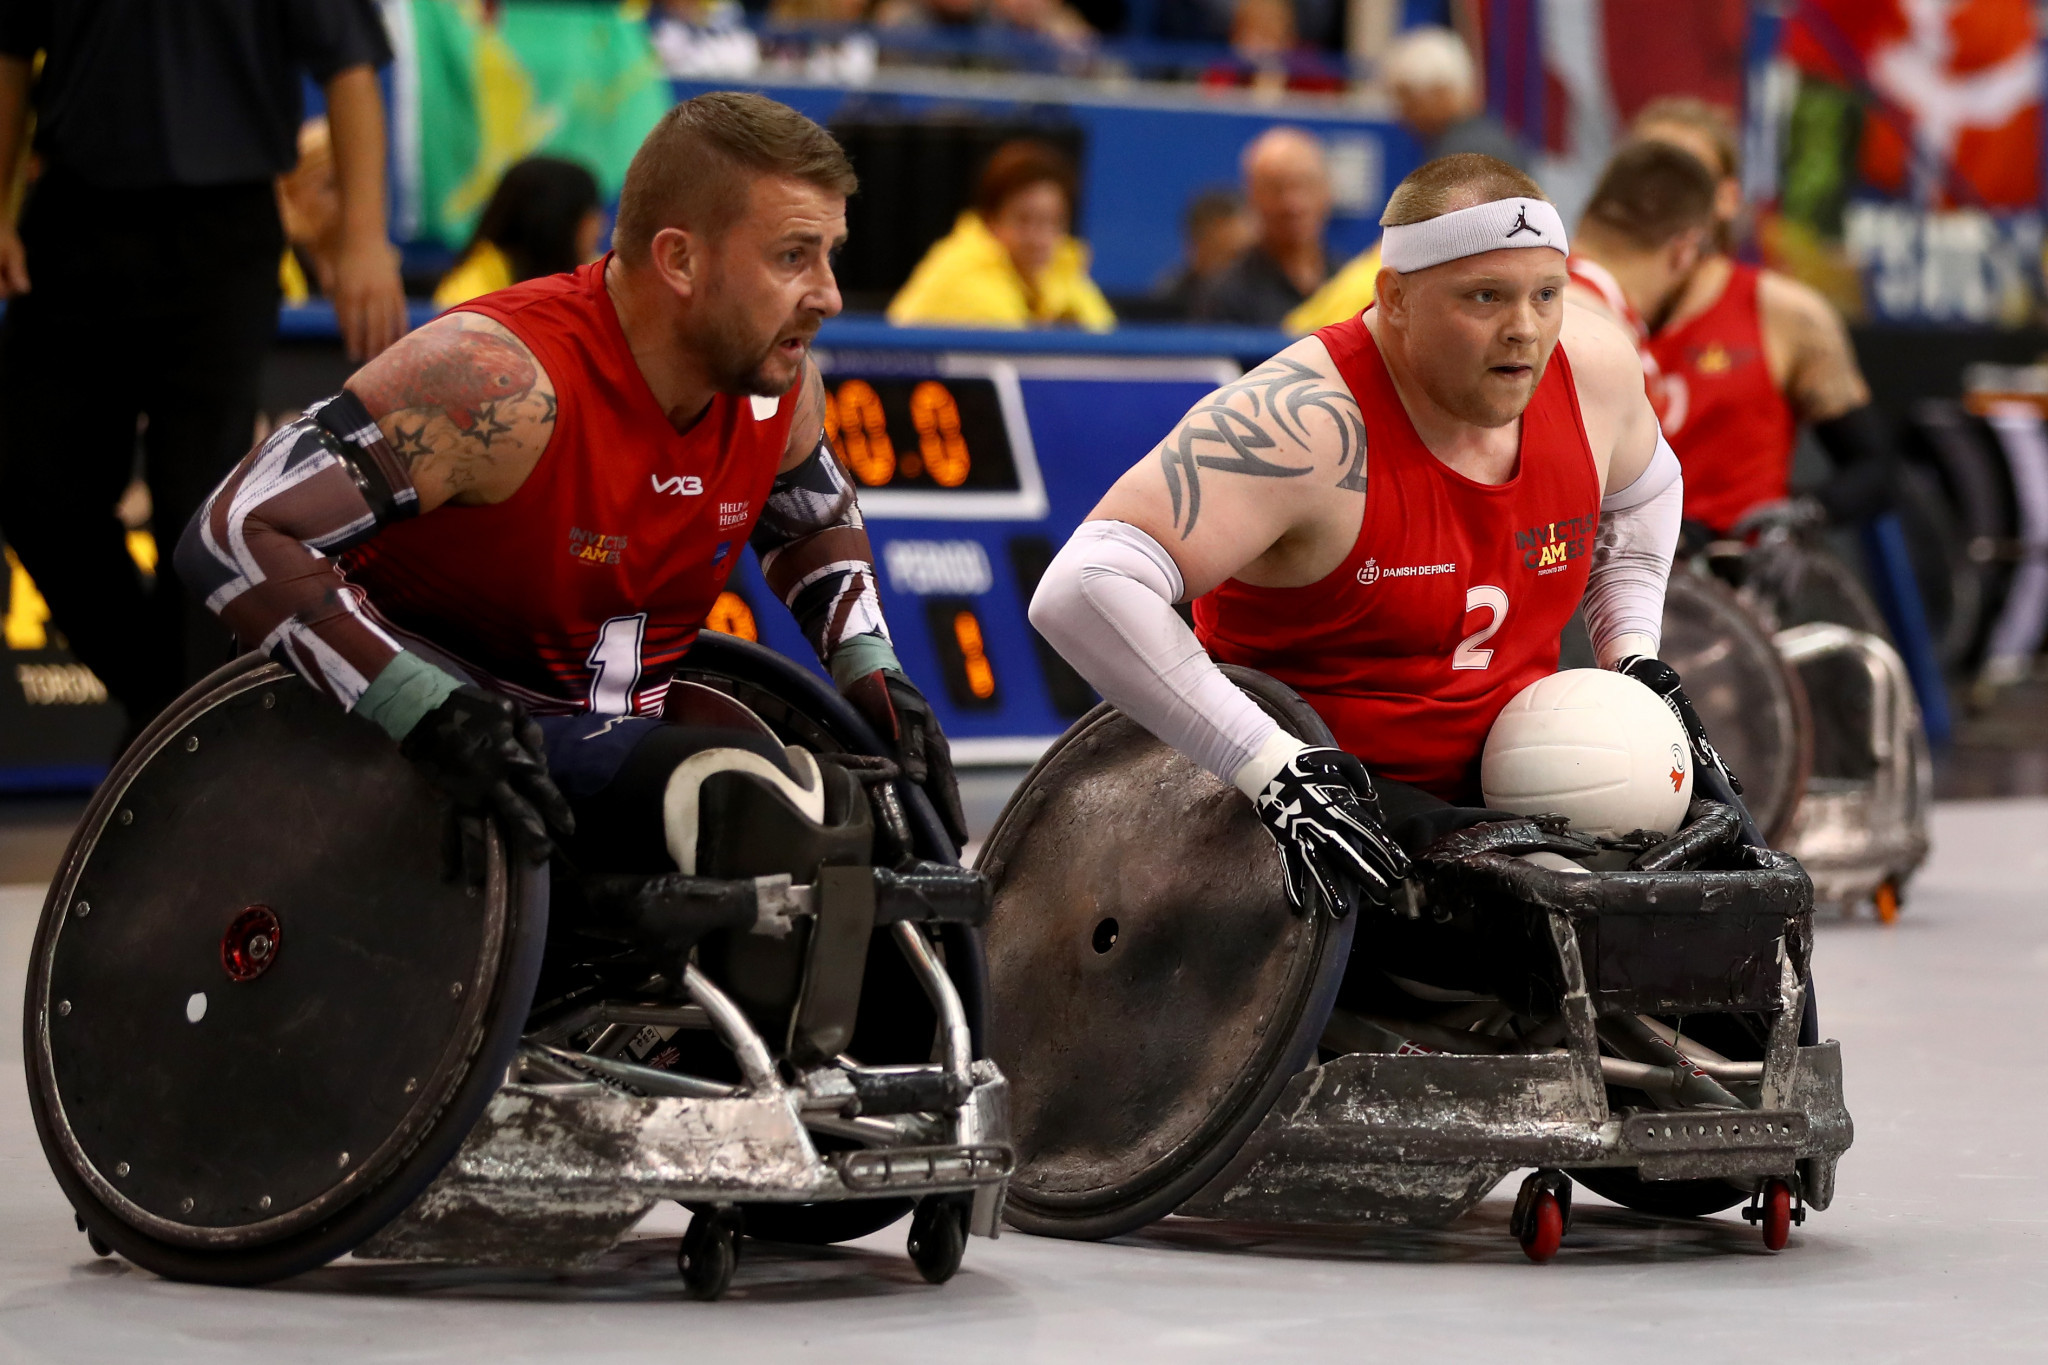 Denmark have won the wheelchair rugby gold medal at the 2017 Invictus Games ©Getty Images